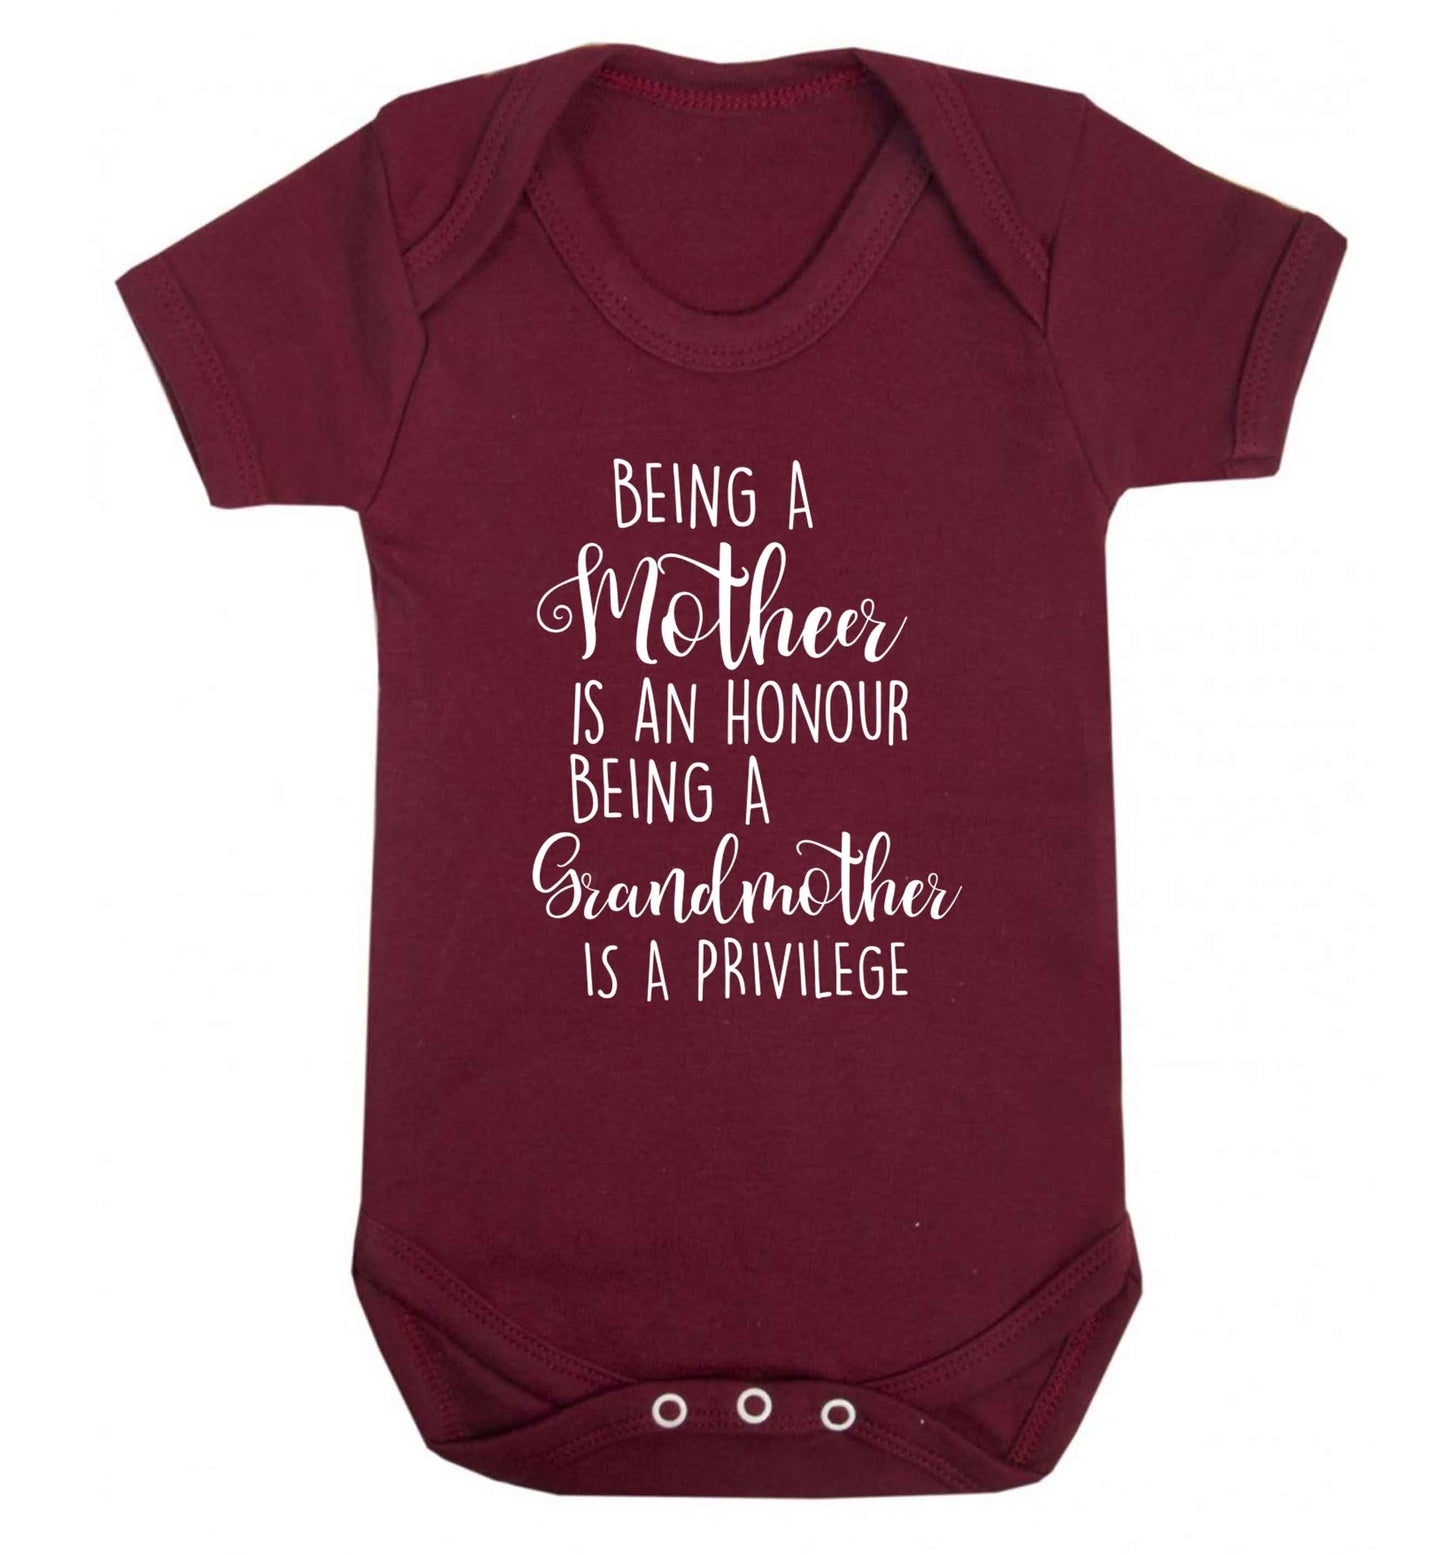 Being a mother is an honour being an grandmother is a privilege Baby Vest maroon 18-24 months